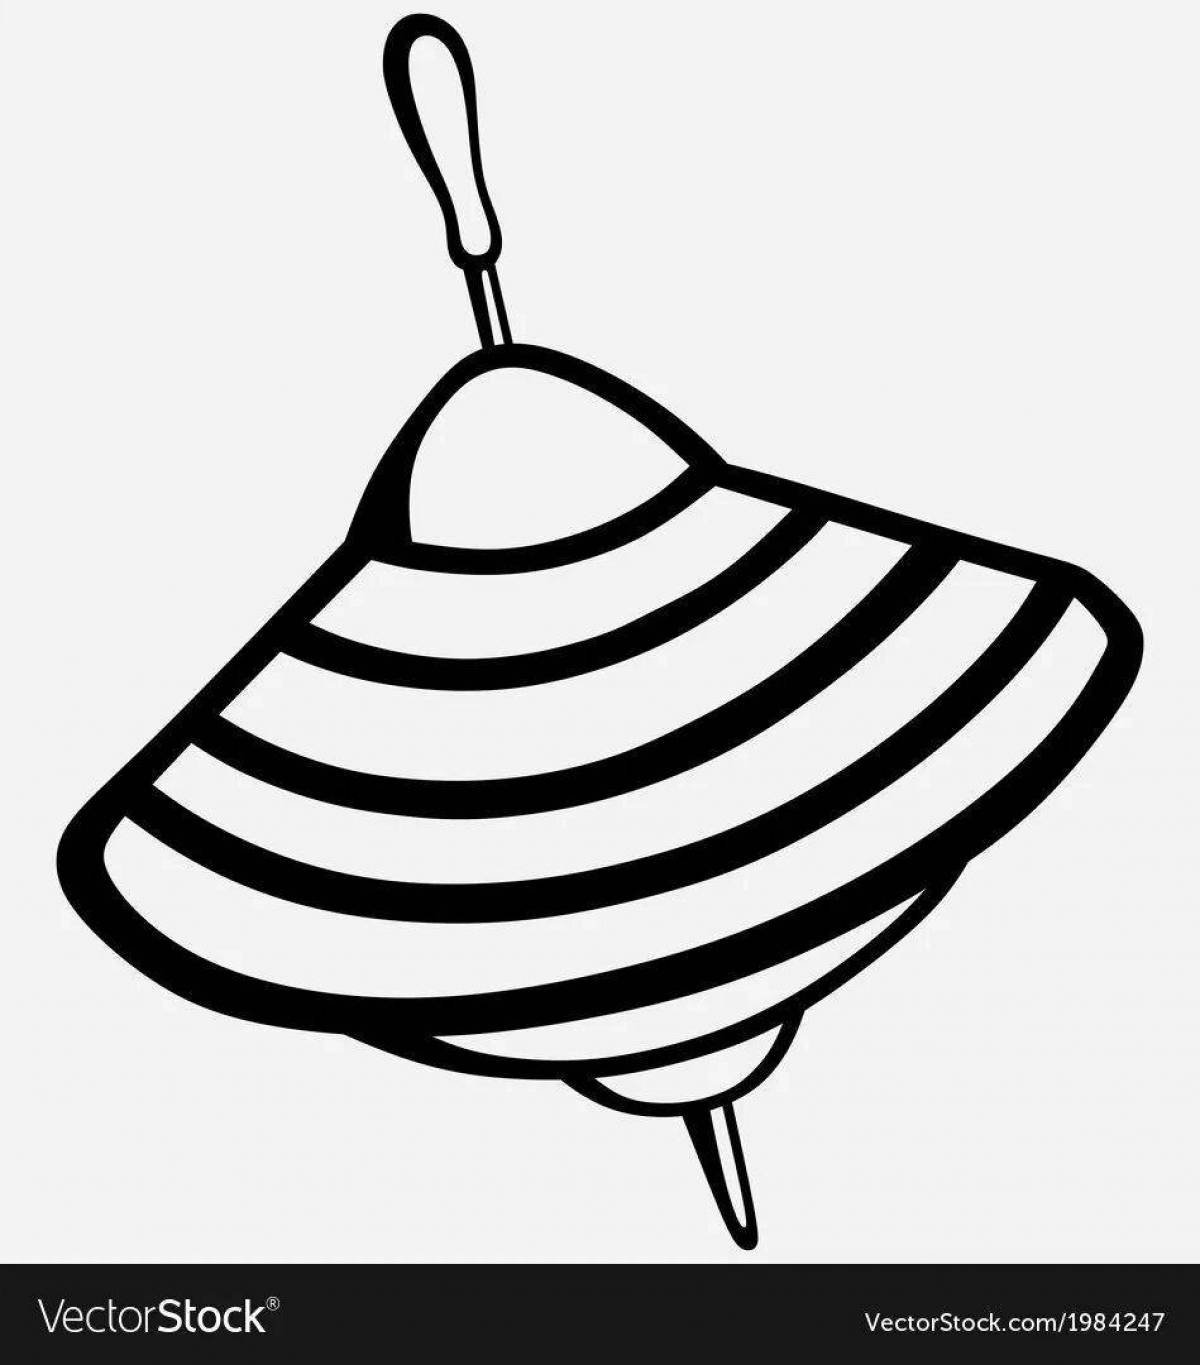 Amazing Spinning Top Coloring Pages for Preschoolers